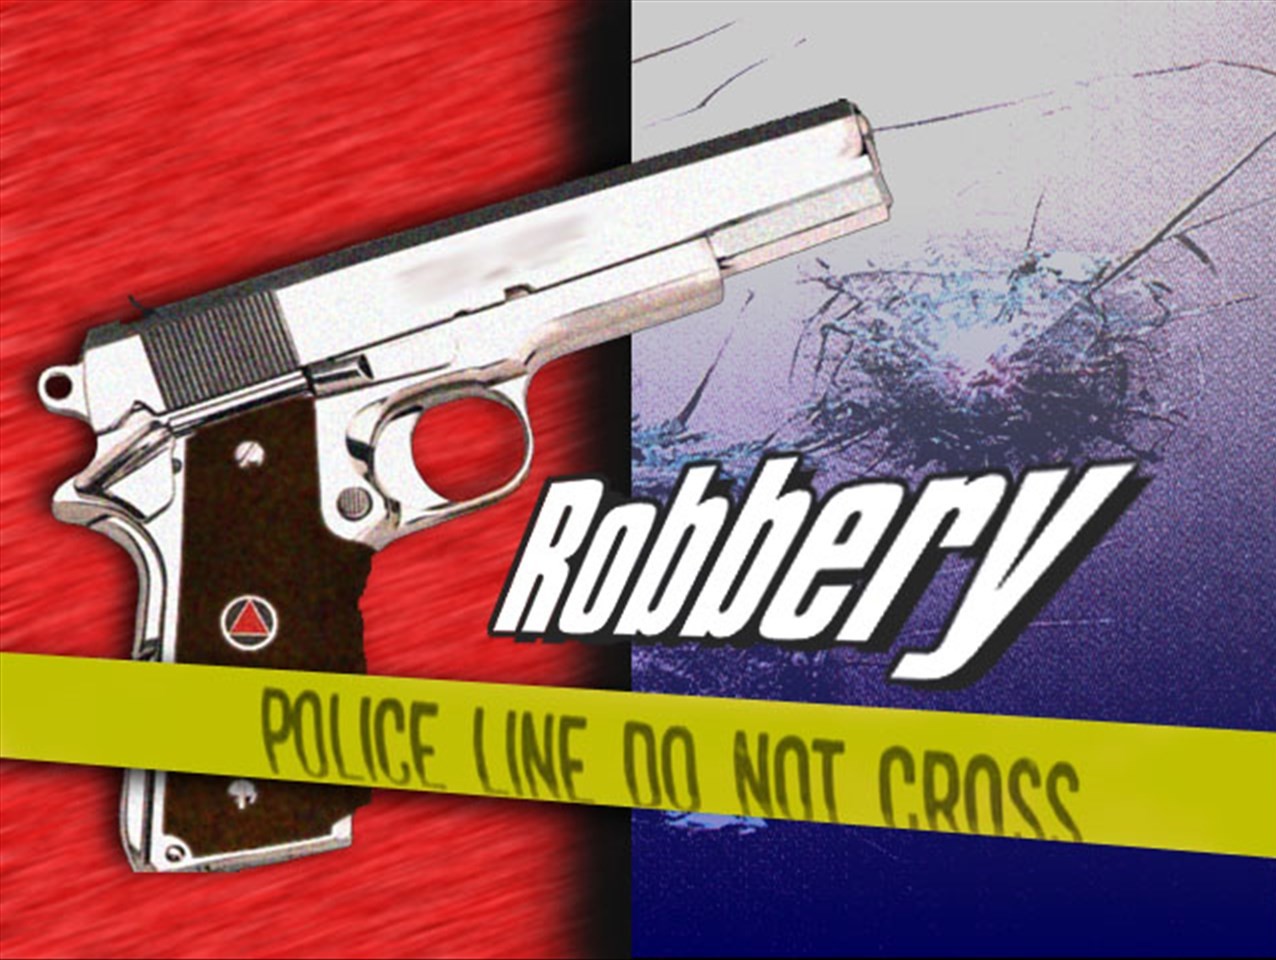 Rs 12 lakh gone in bank robbery at Hoshiarpur village